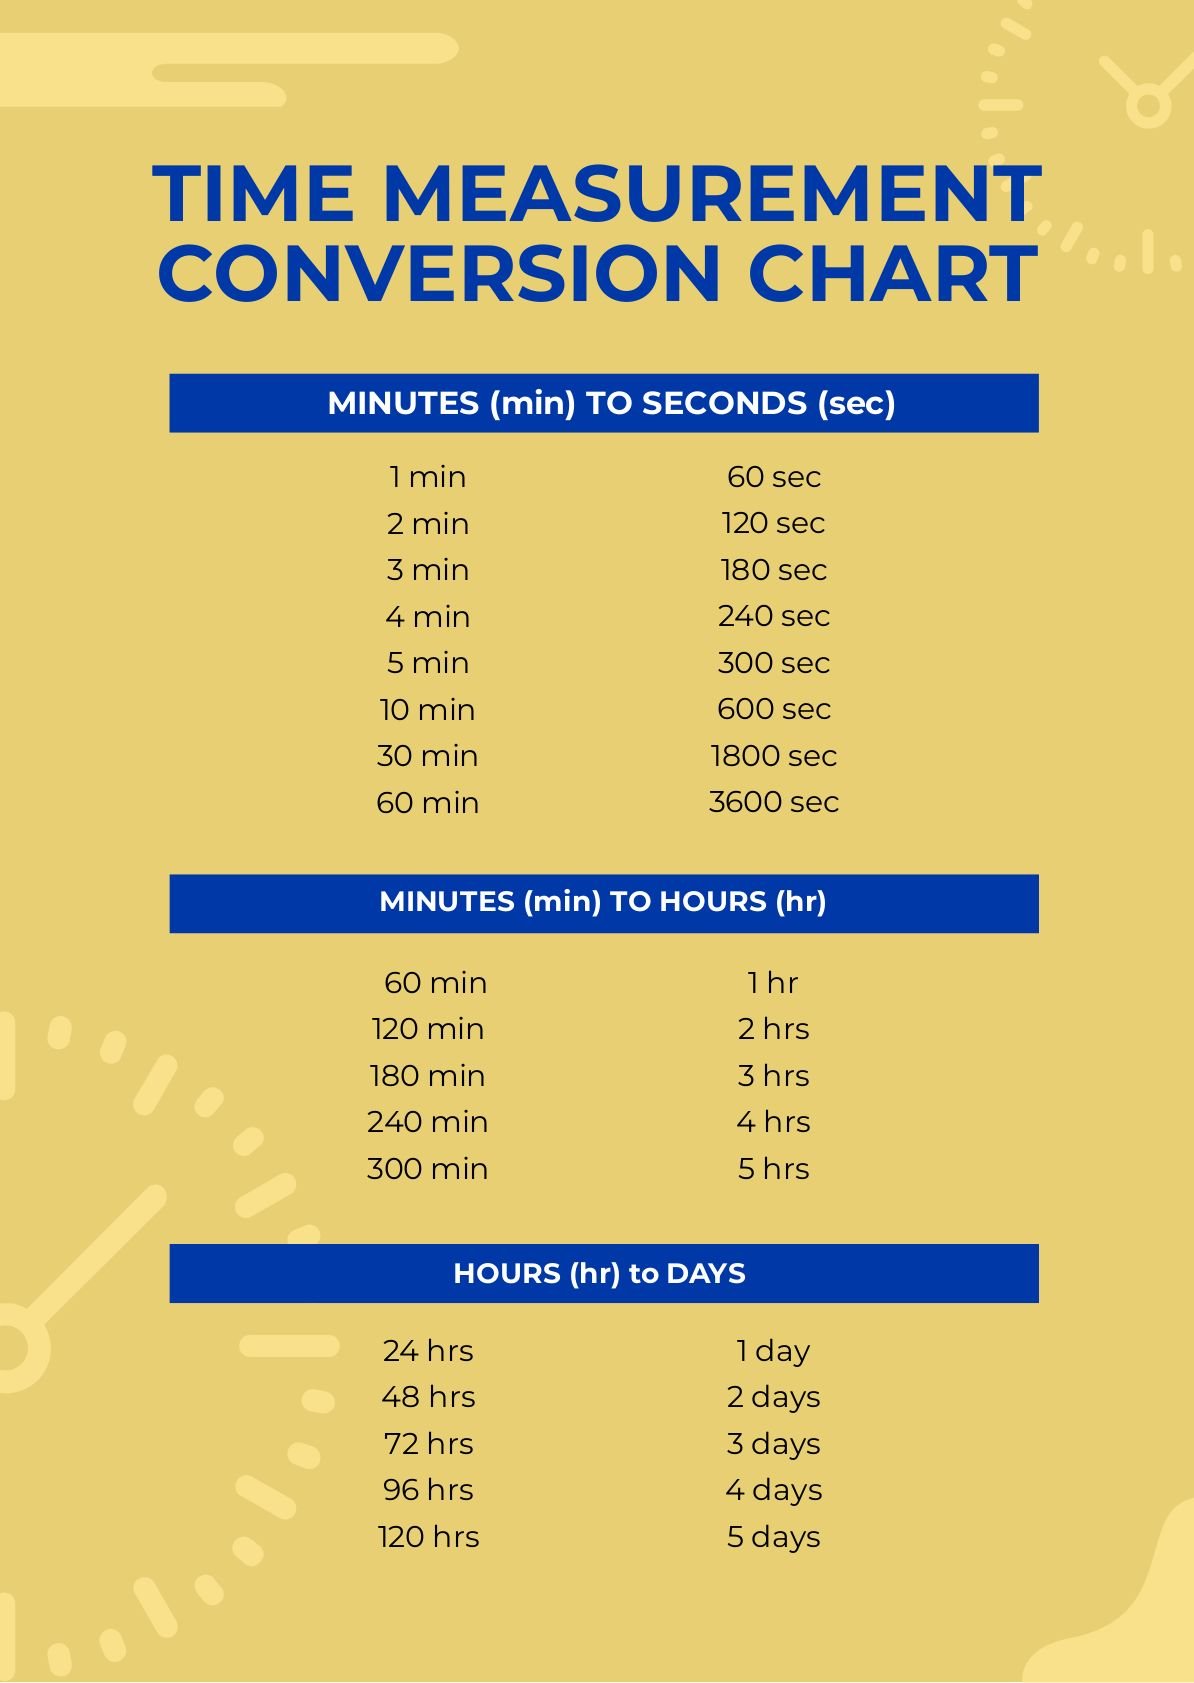 Time Measurement Conversion Chart in PDF - Download